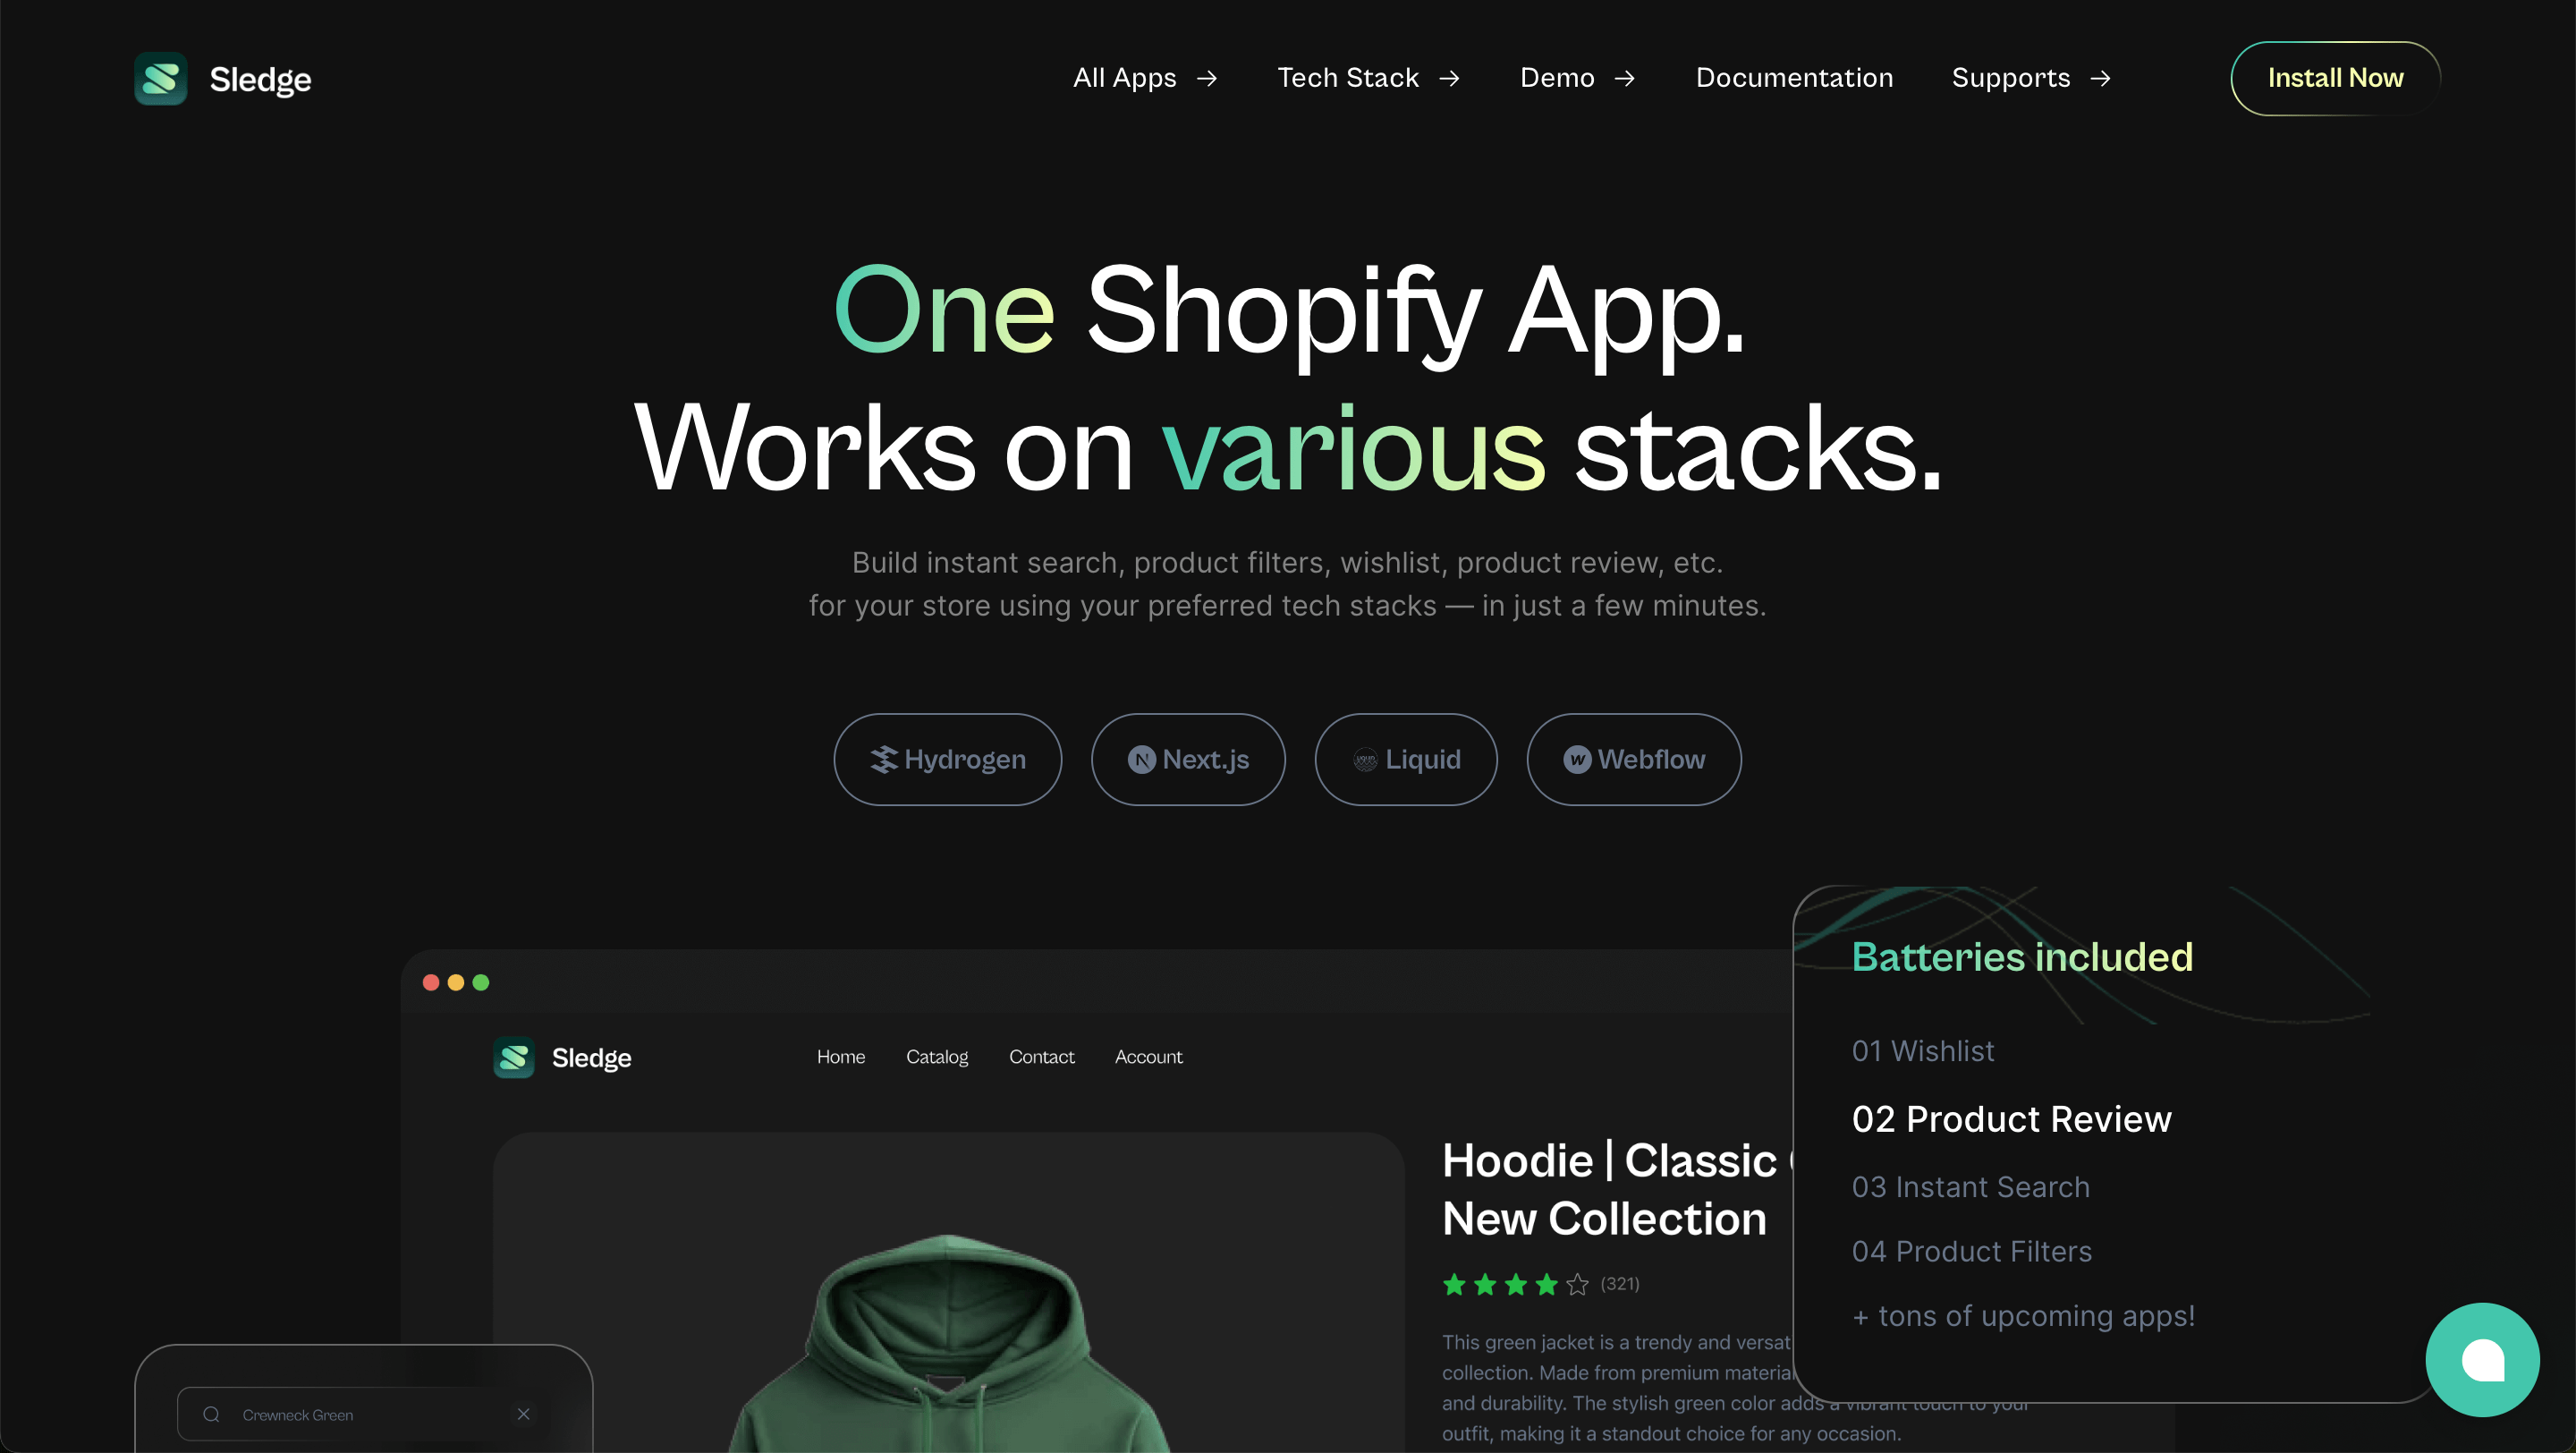 One Shopify With Sledge App